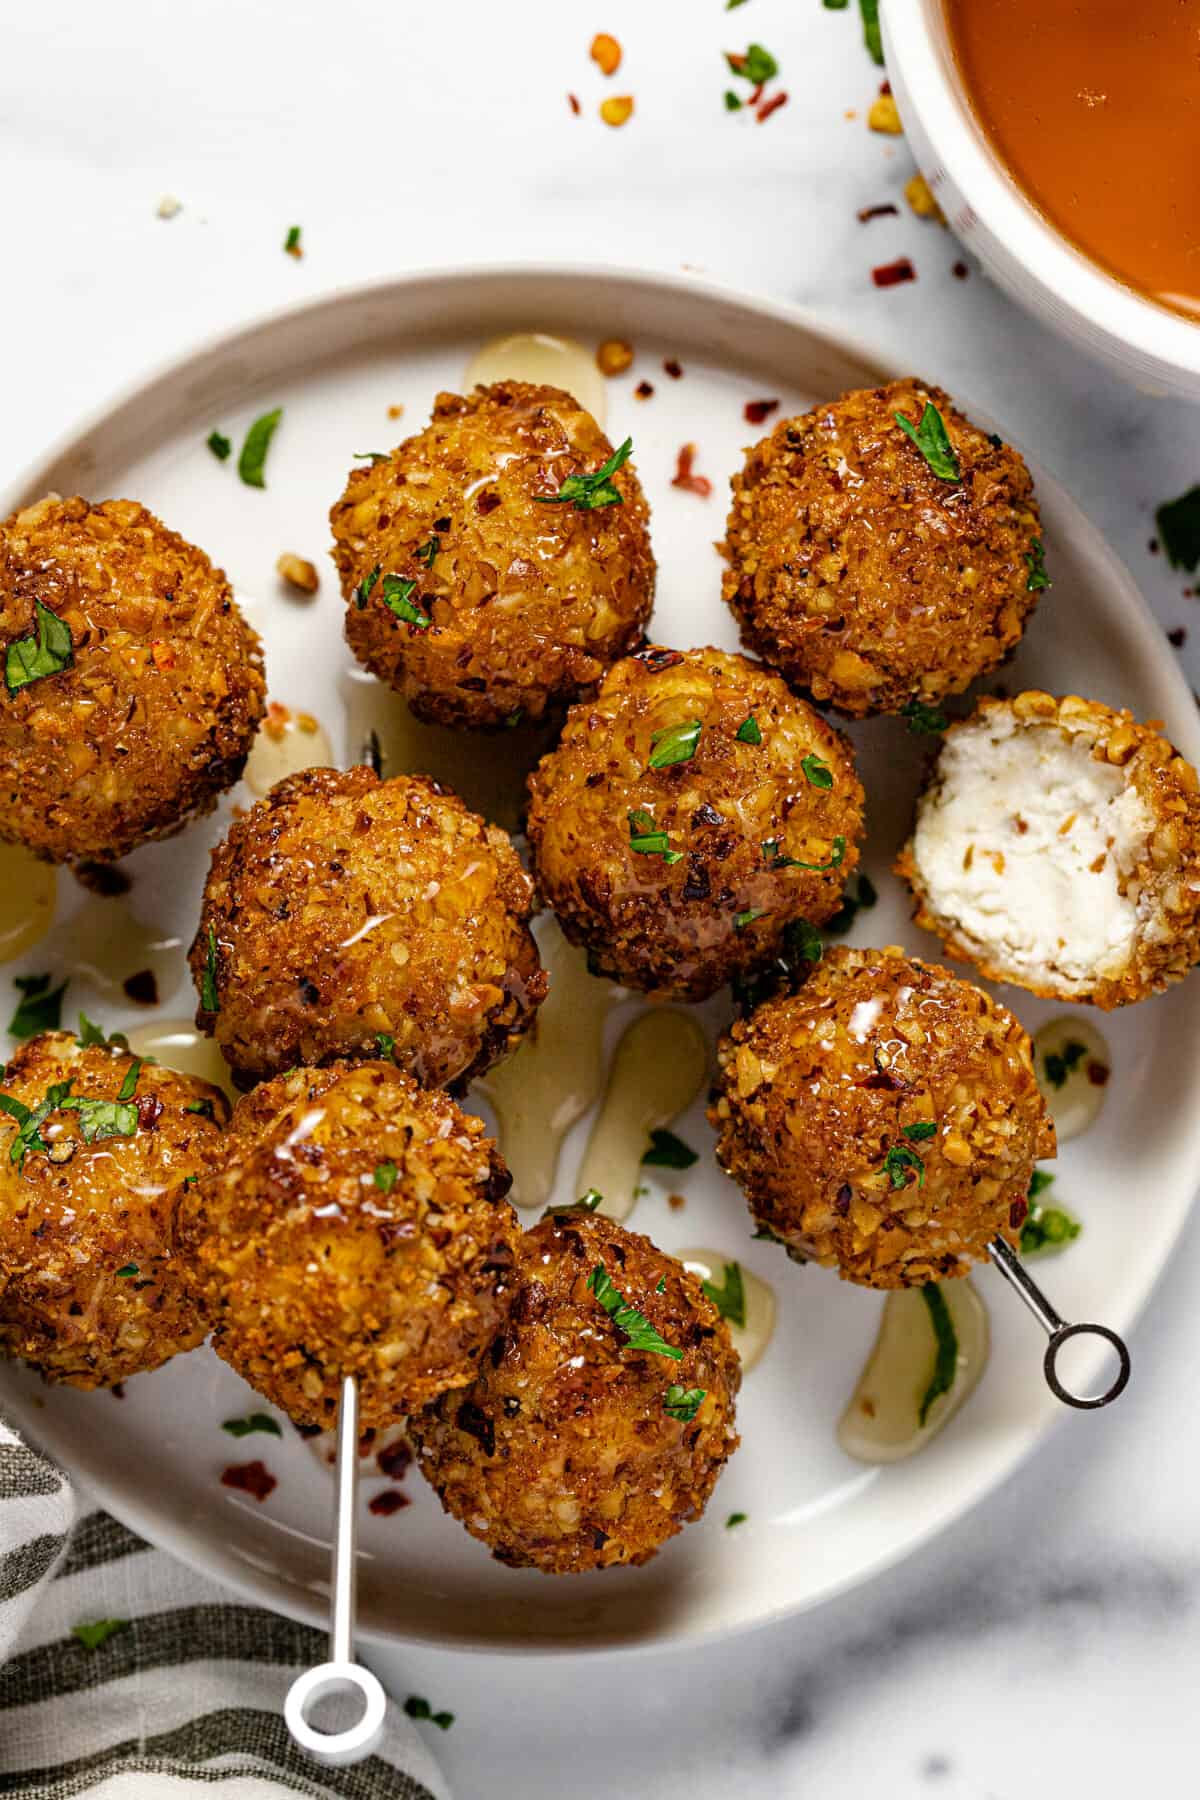 Small white plate with metal skewers speared with fried goat cheese balls